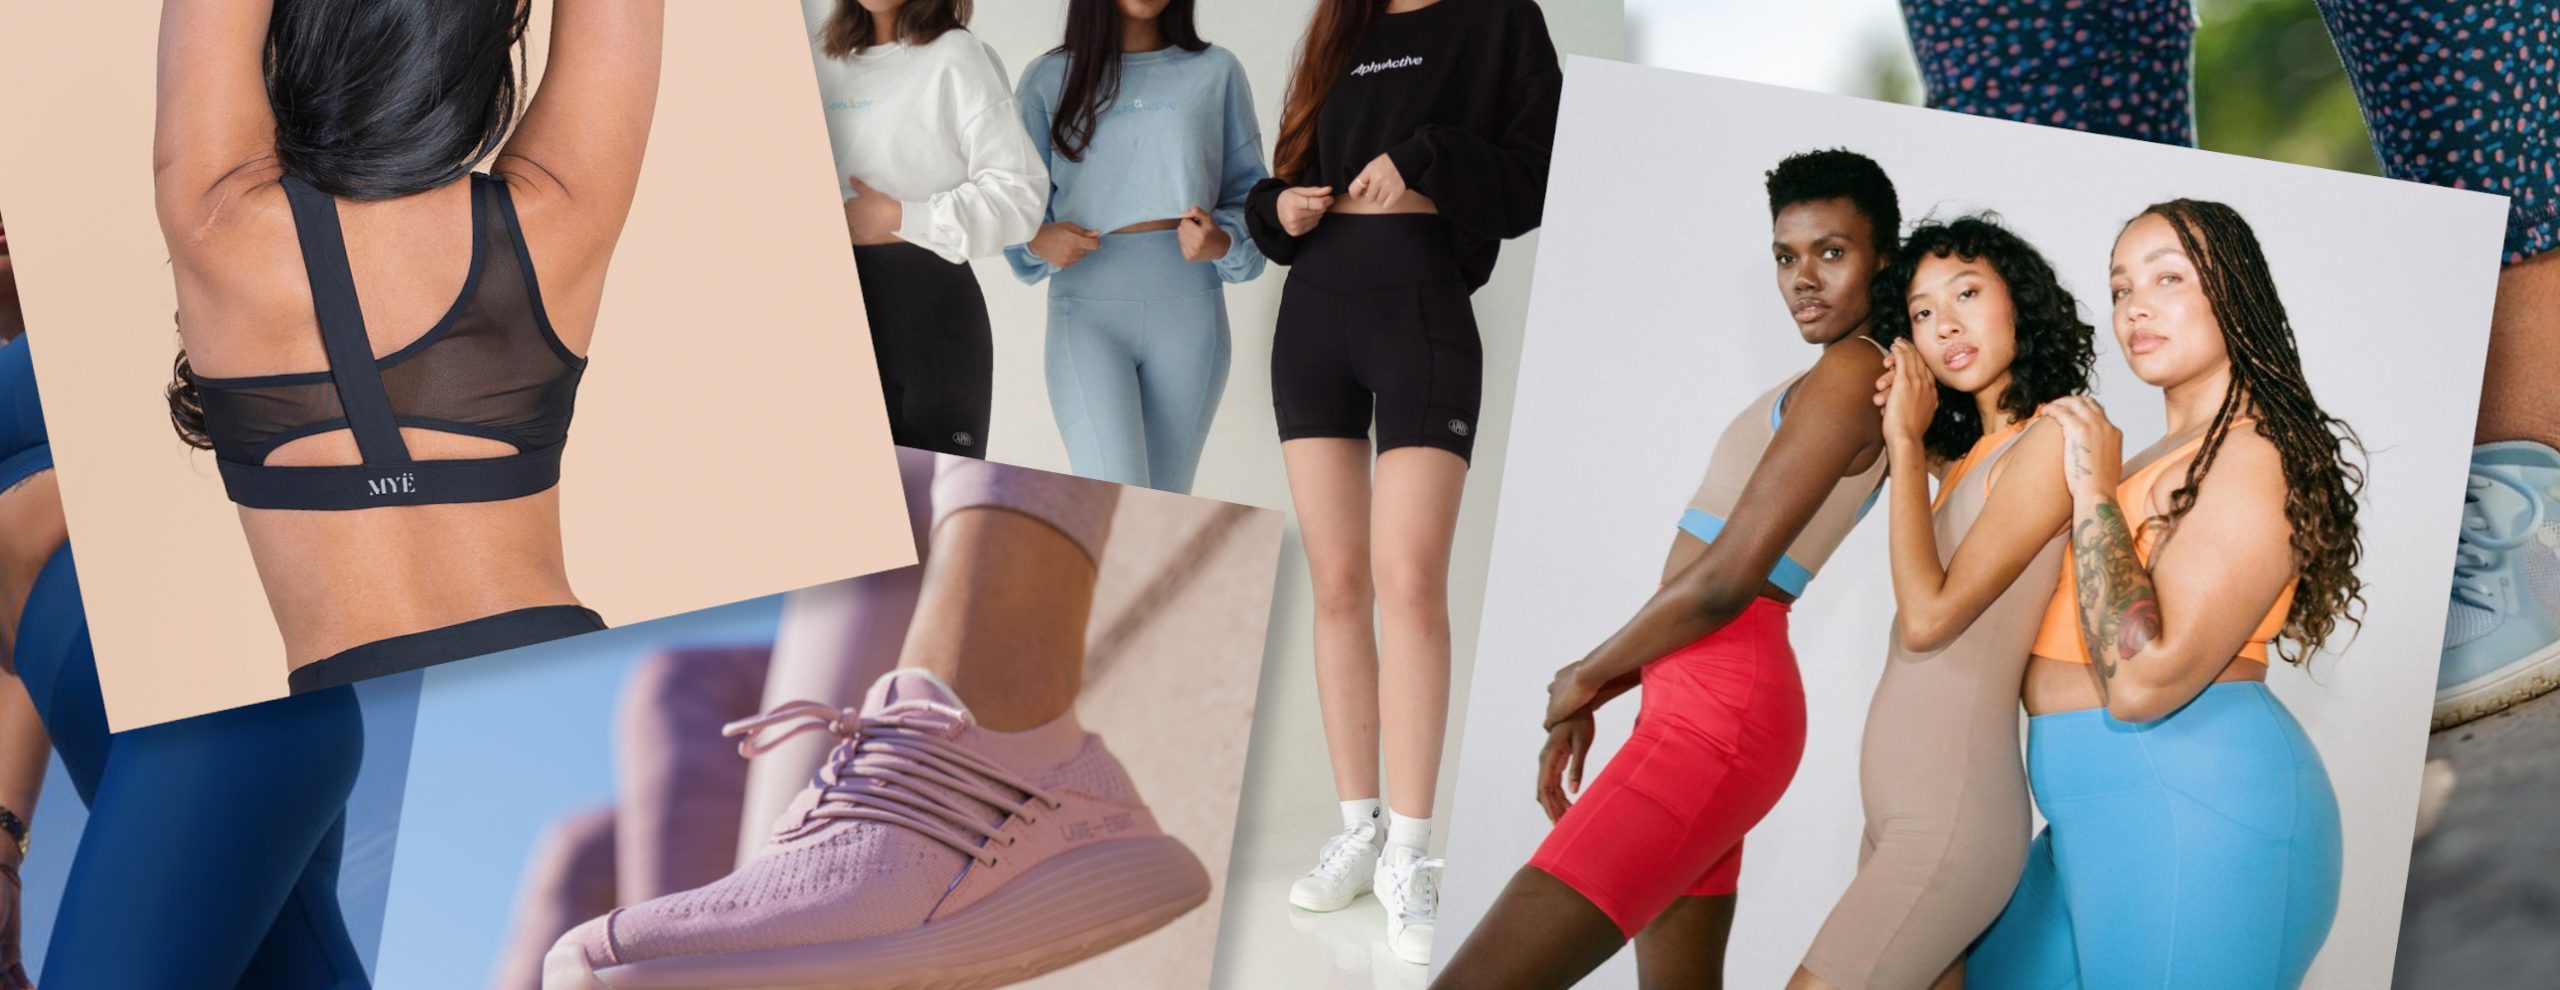 https://www.nylon.com.sg/wp-content/uploads/2021/08/sustainable-activewear-and-sneakers-banner-scaled.jpg